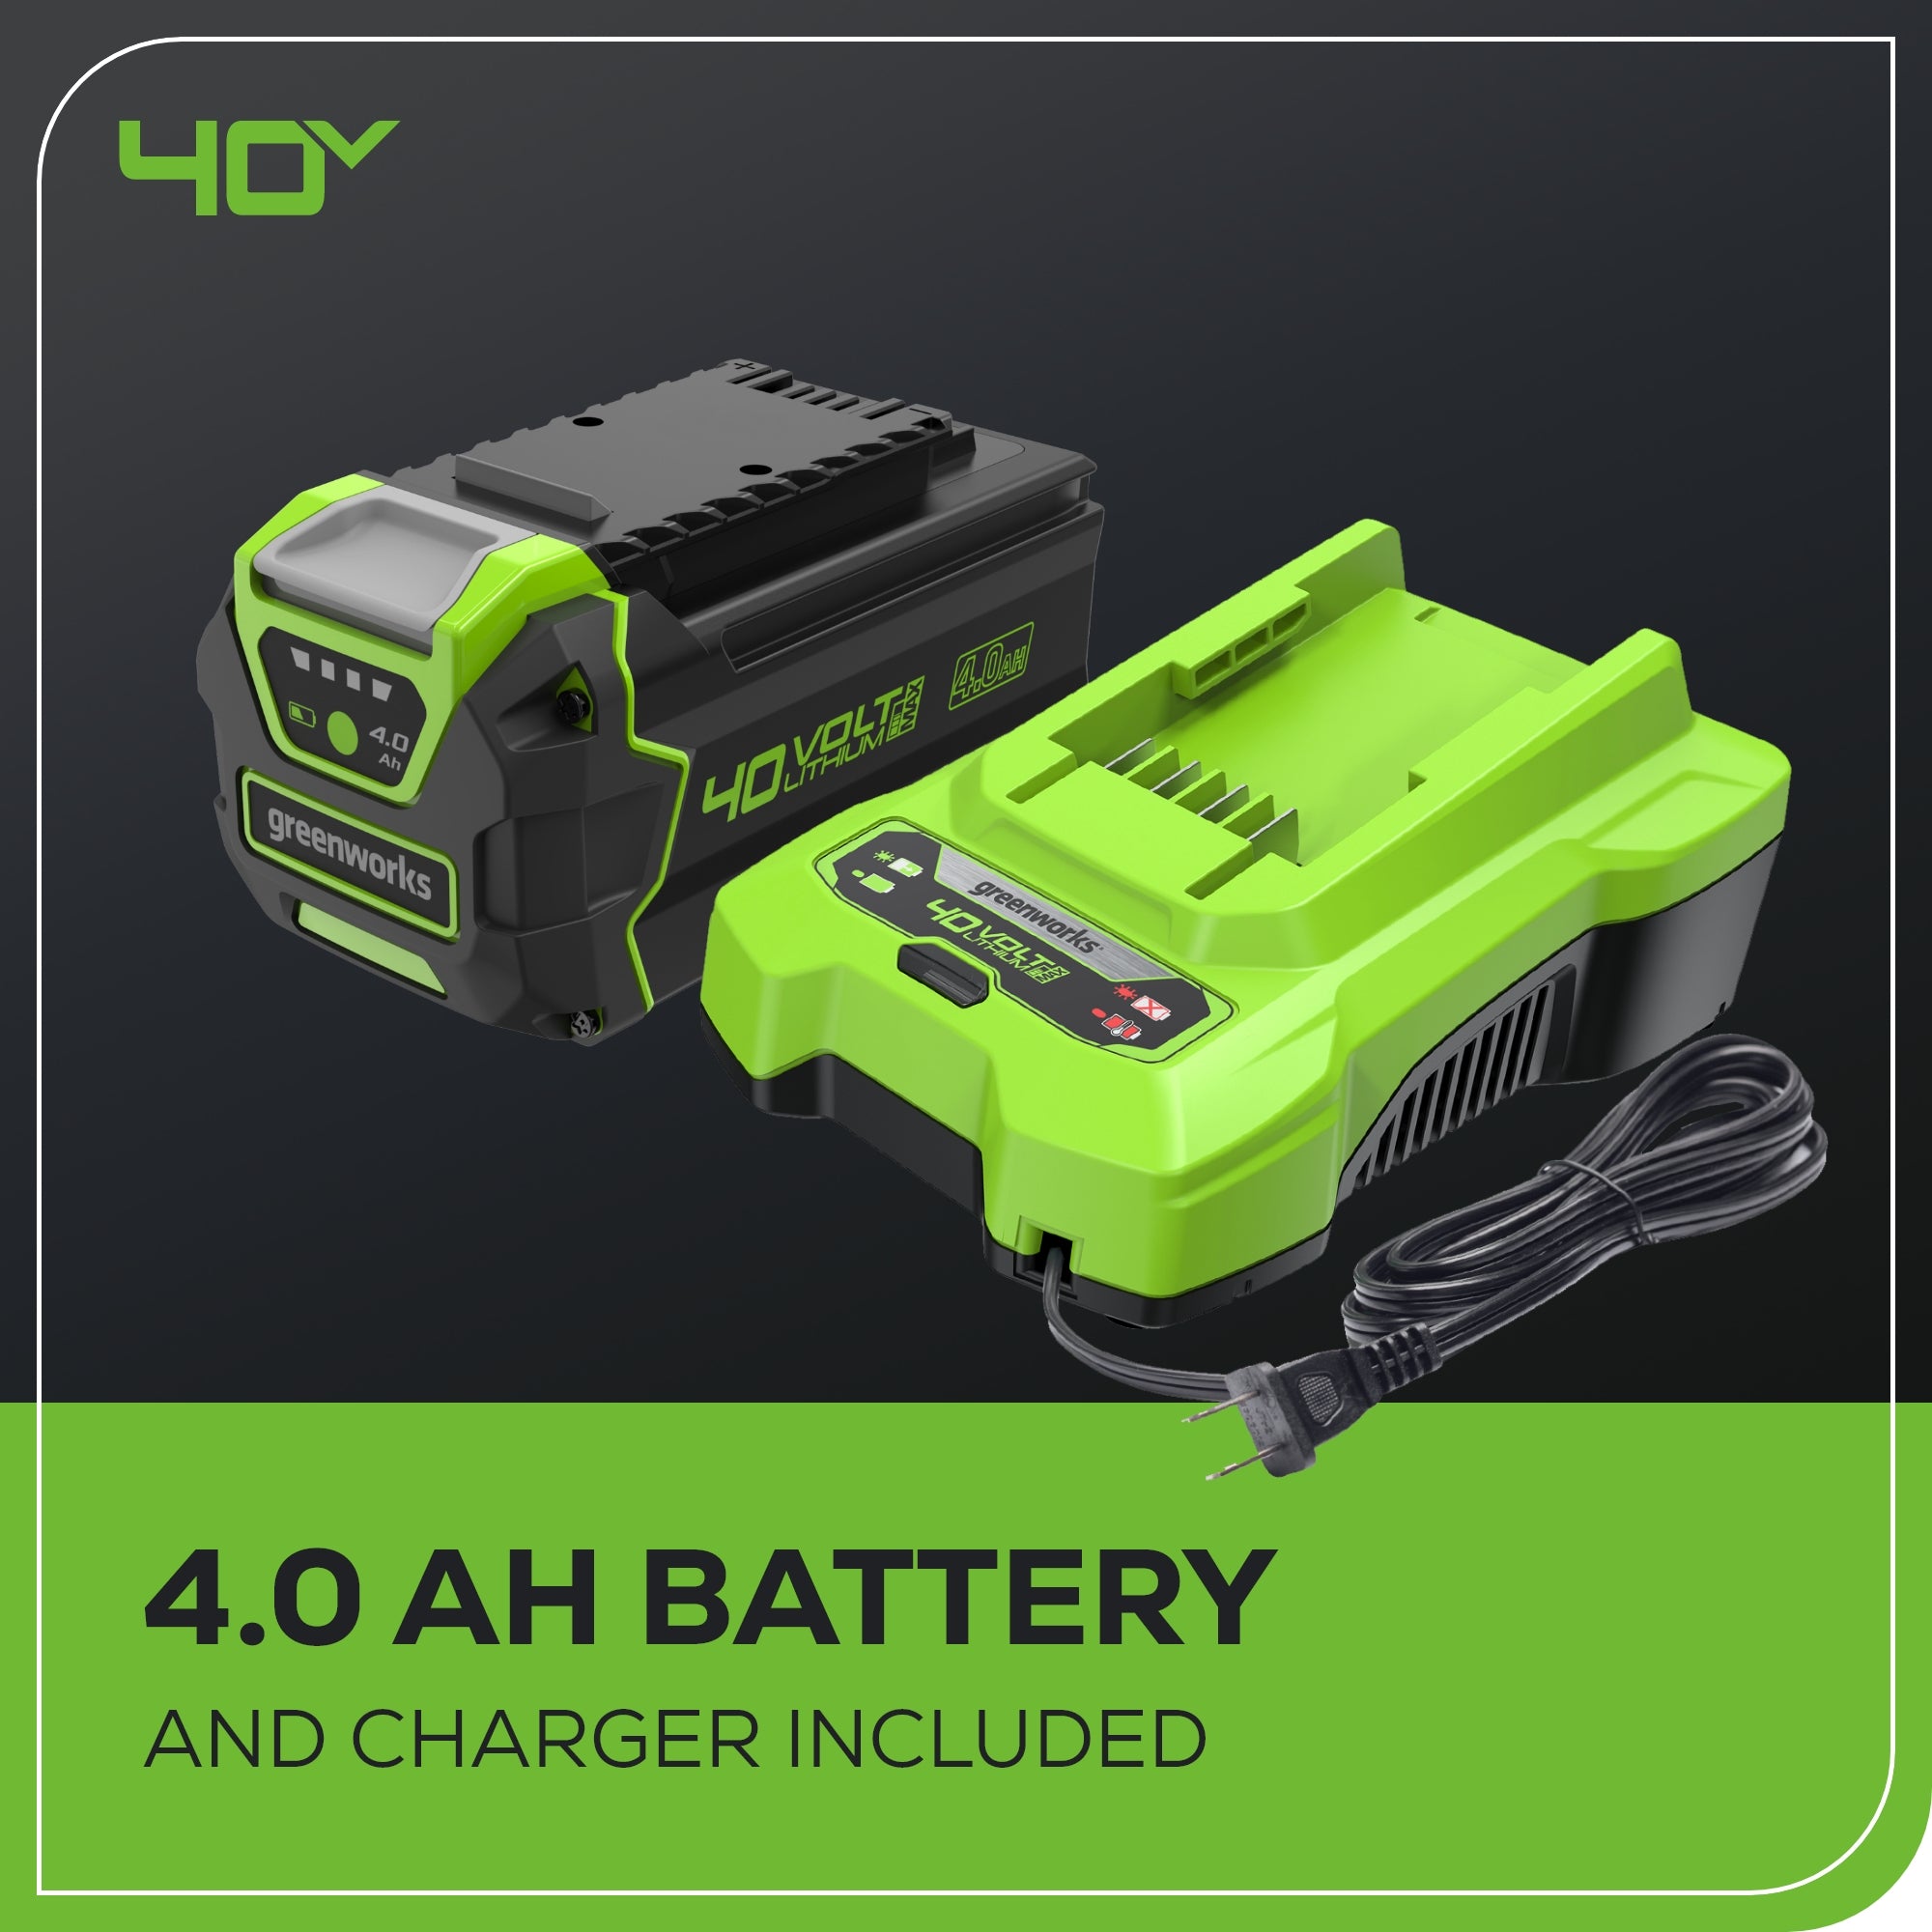 40V Brushless 3 Gallon Cordless Battery Wet/Dry Shop Vacuum w/ 4.0Ah Battery and Charger